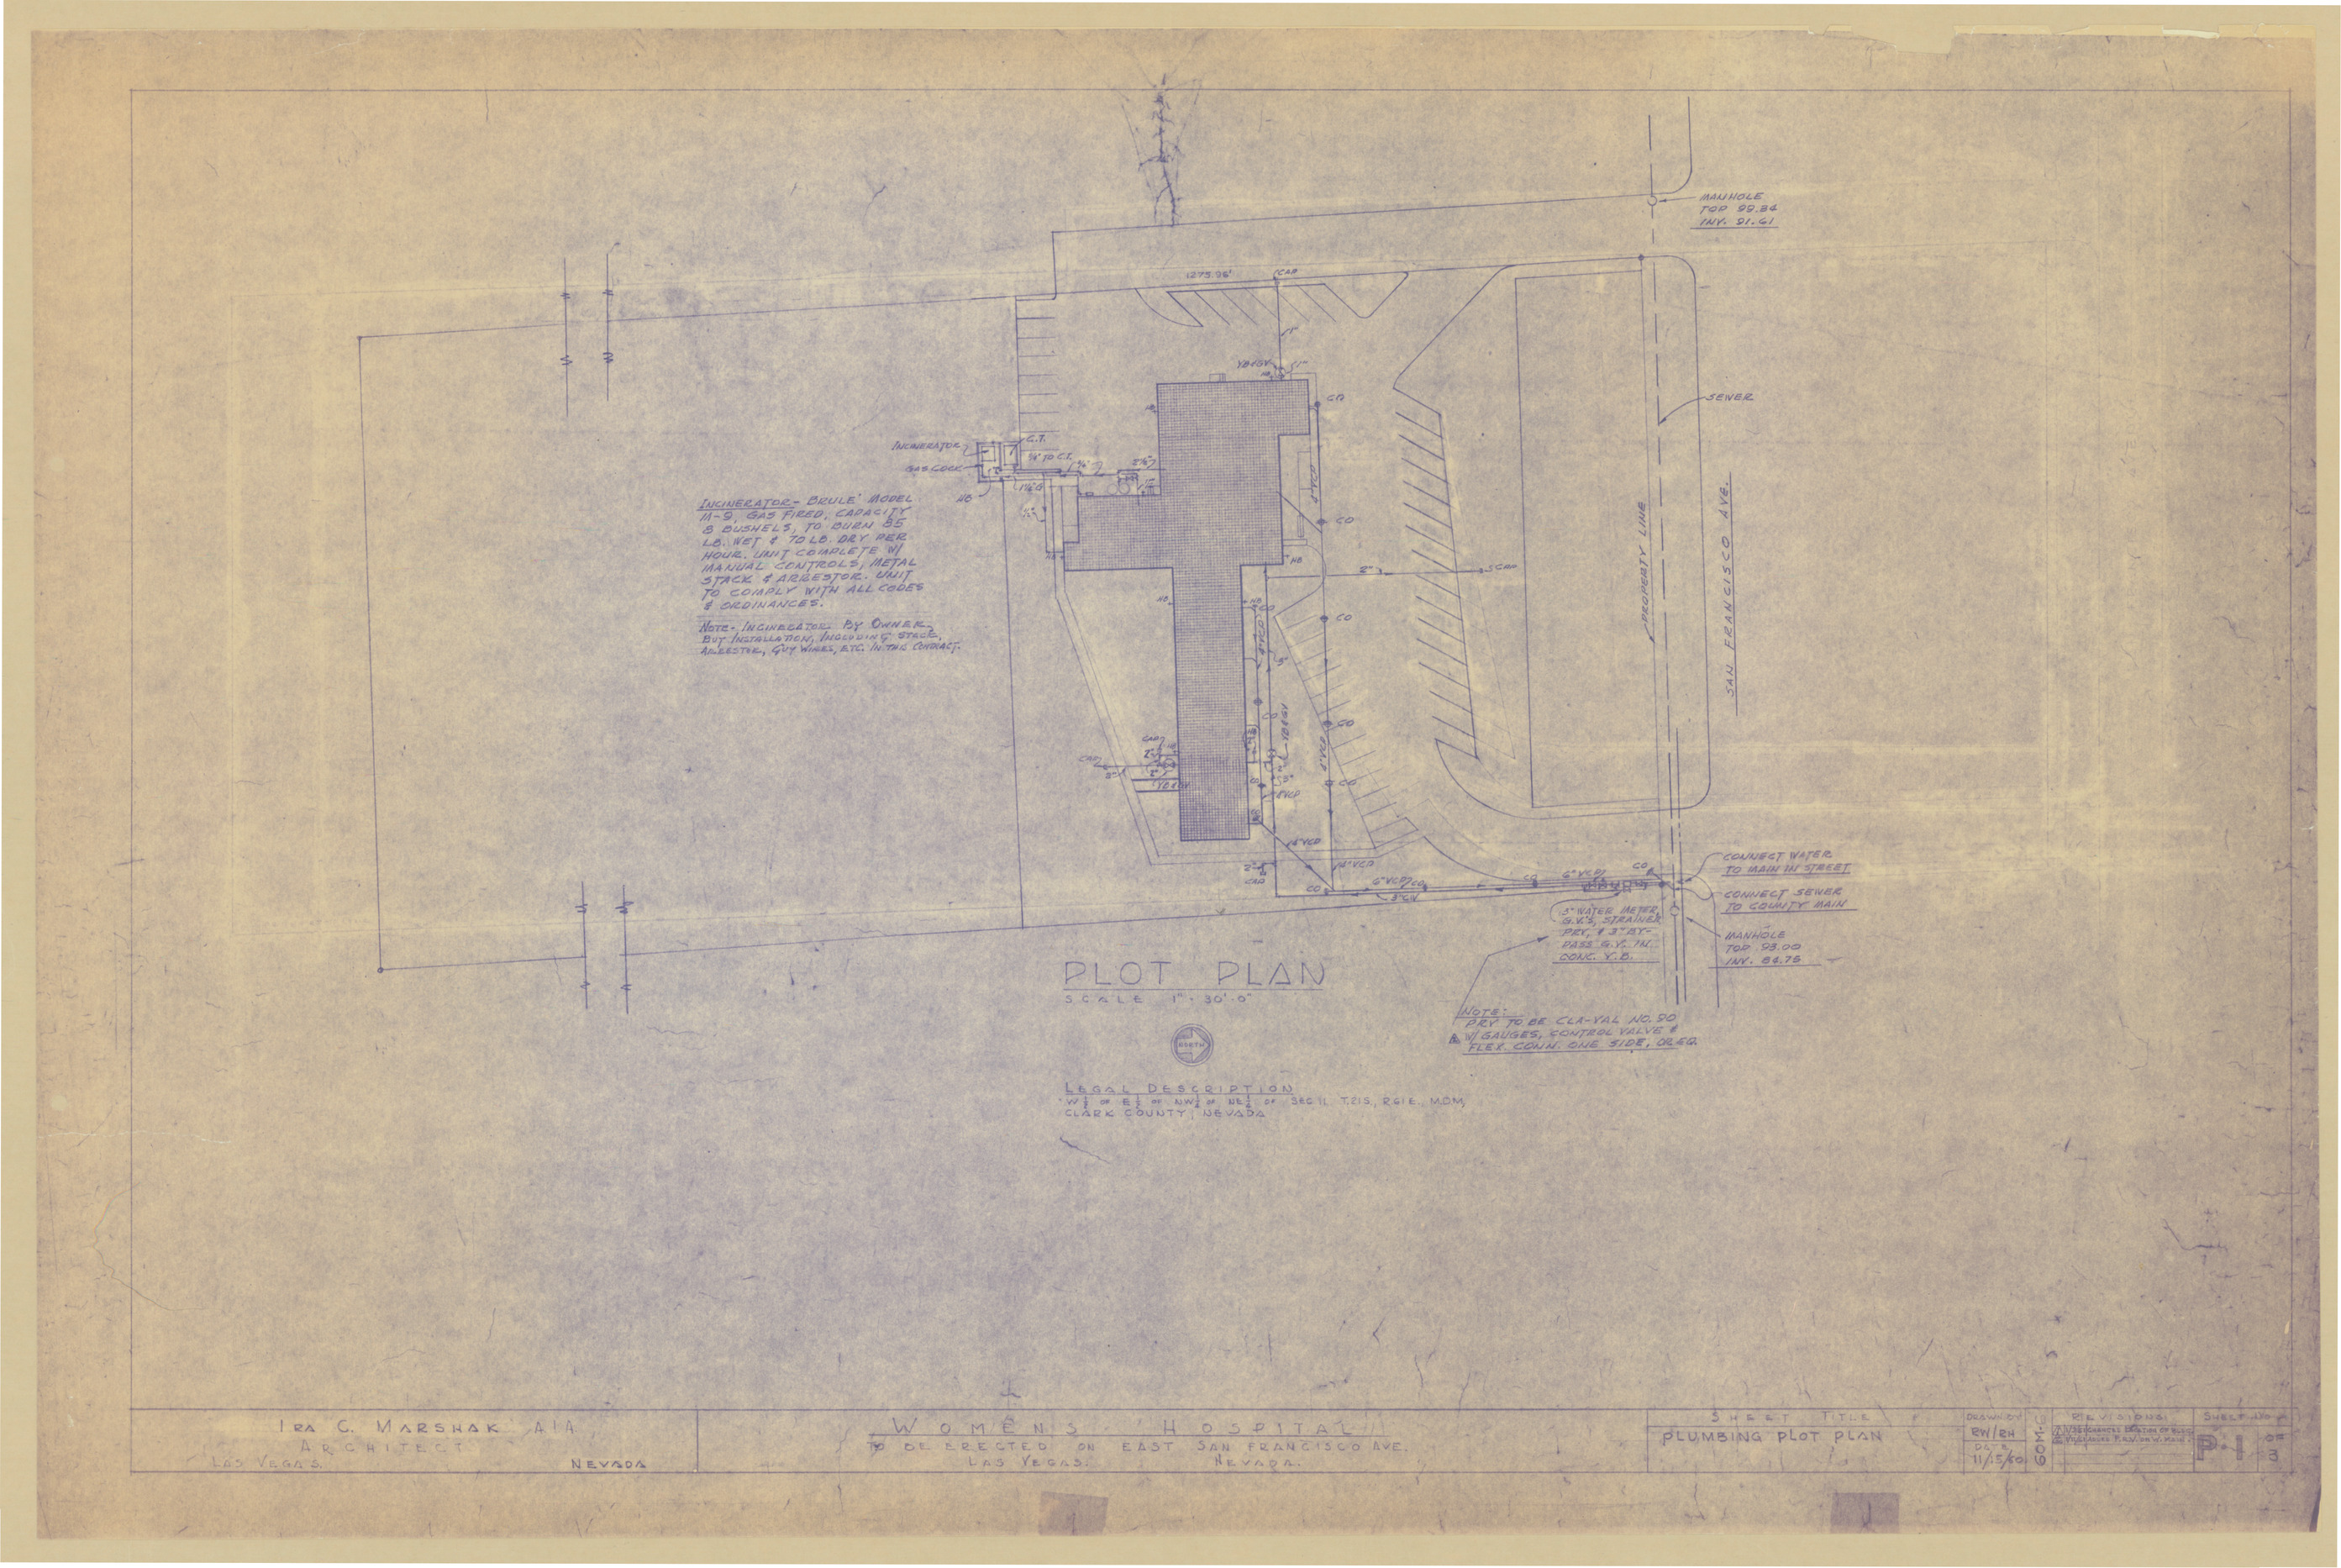 Women's Hospital: architectural, mechanical, electrical, plumbing drawings, image 005